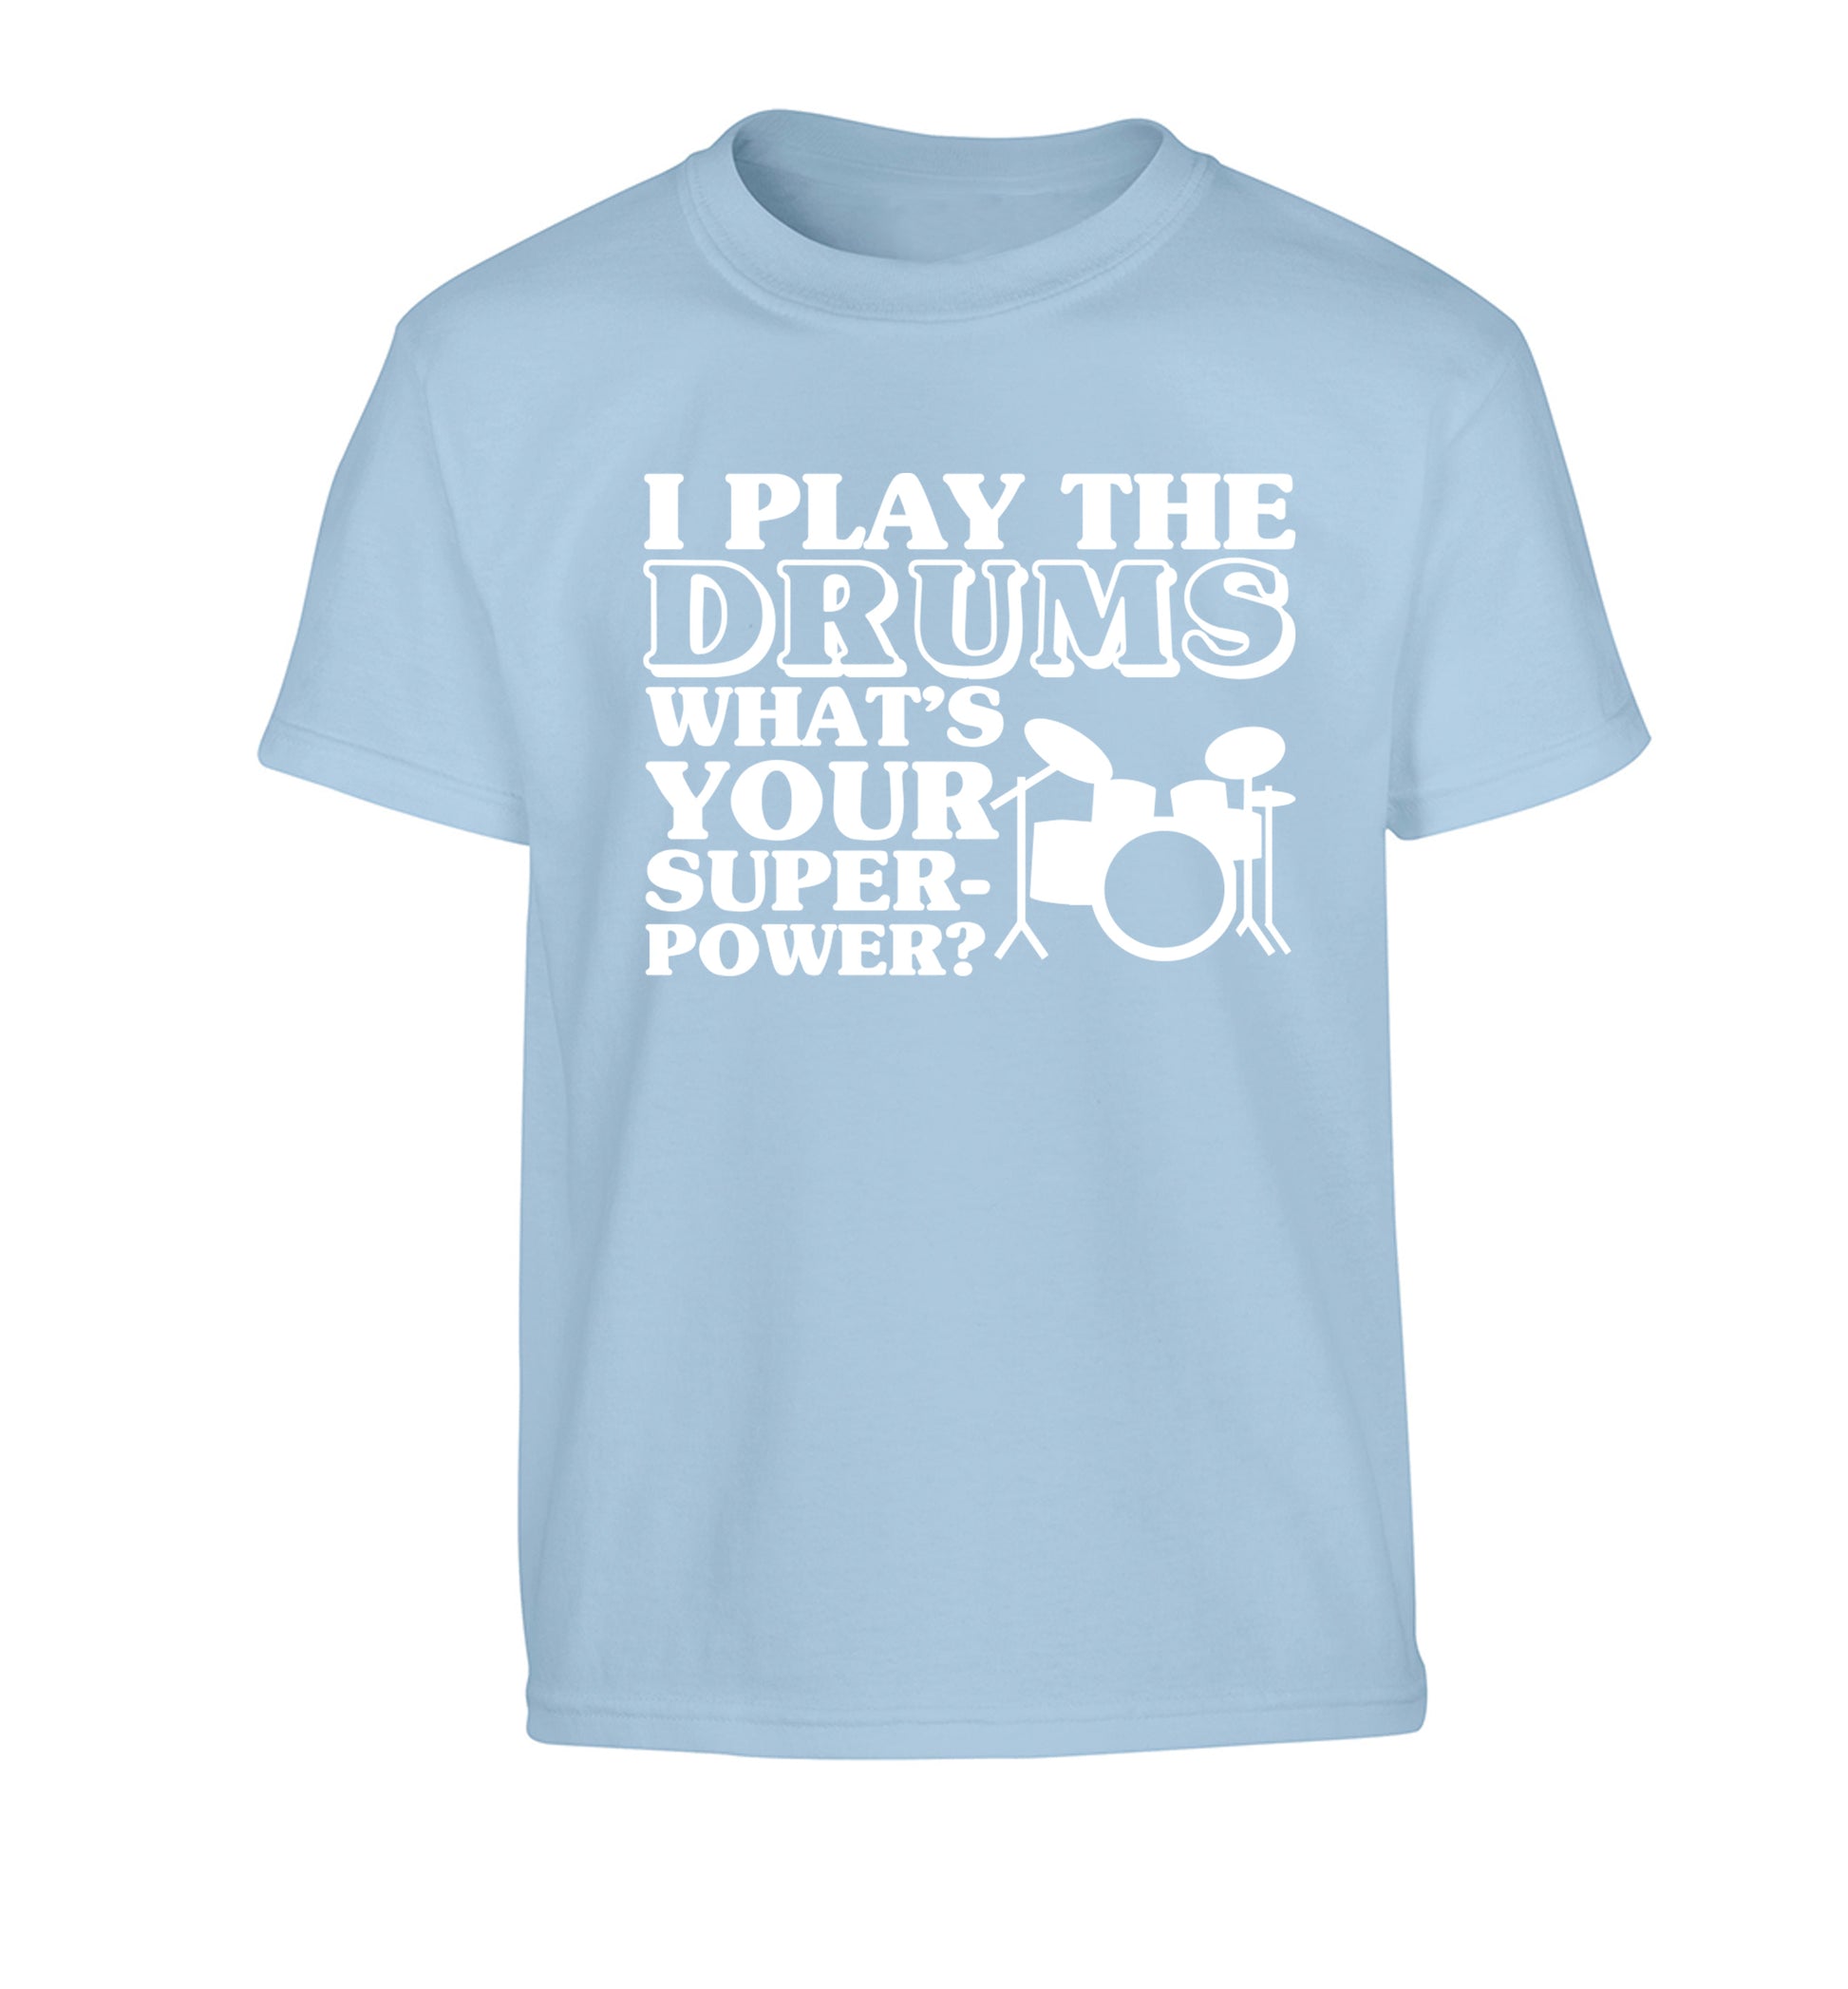 I play the drums what's your superpower? Children's light blue Tshirt 12-14 Years